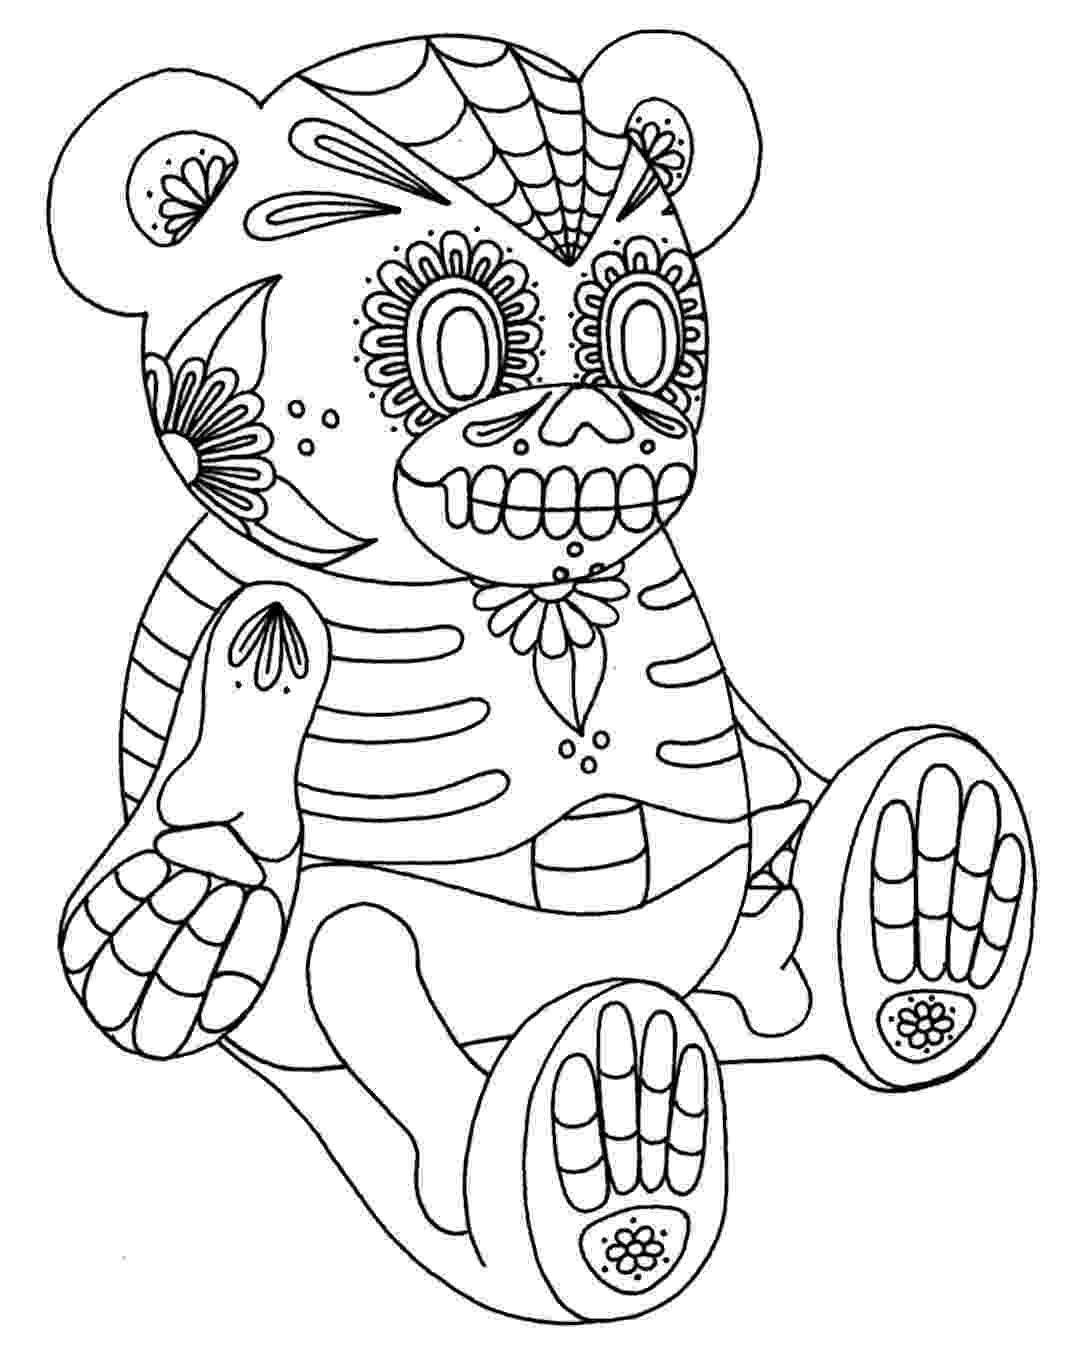 sugar skulls pictures day of the dead sugar skull coloring page free printable skulls pictures sugar 